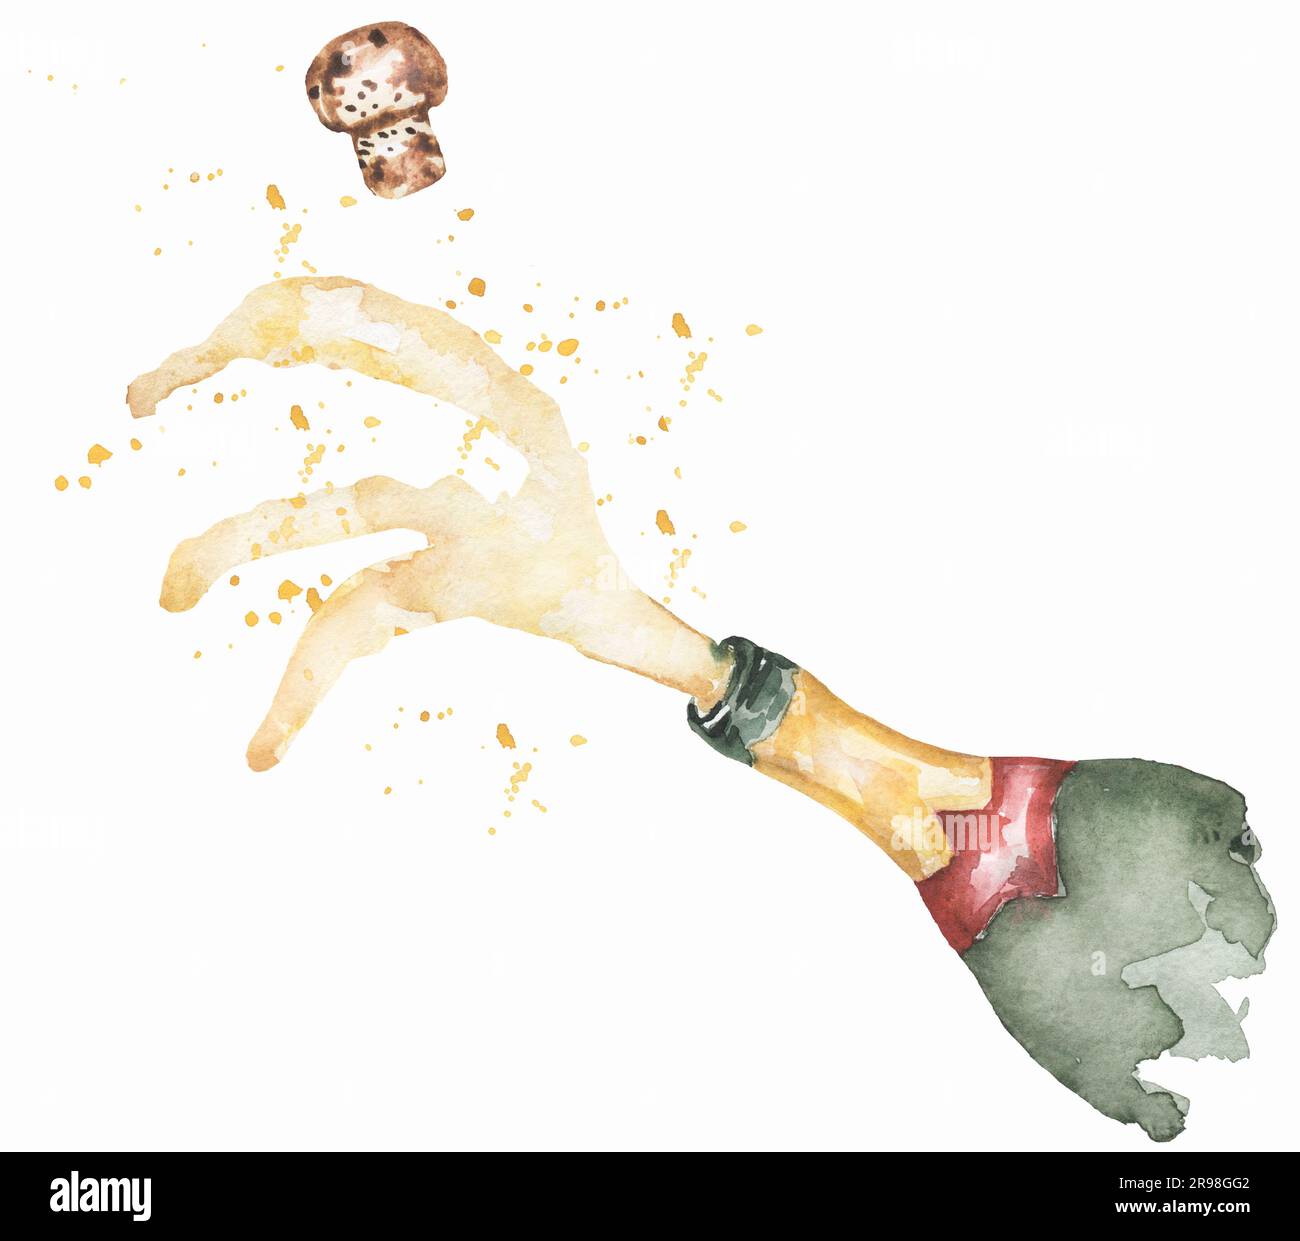 Watercolor open bottle with champagne and splashes clipart. Watercolor food illustration, beverages clip art Stock Photo